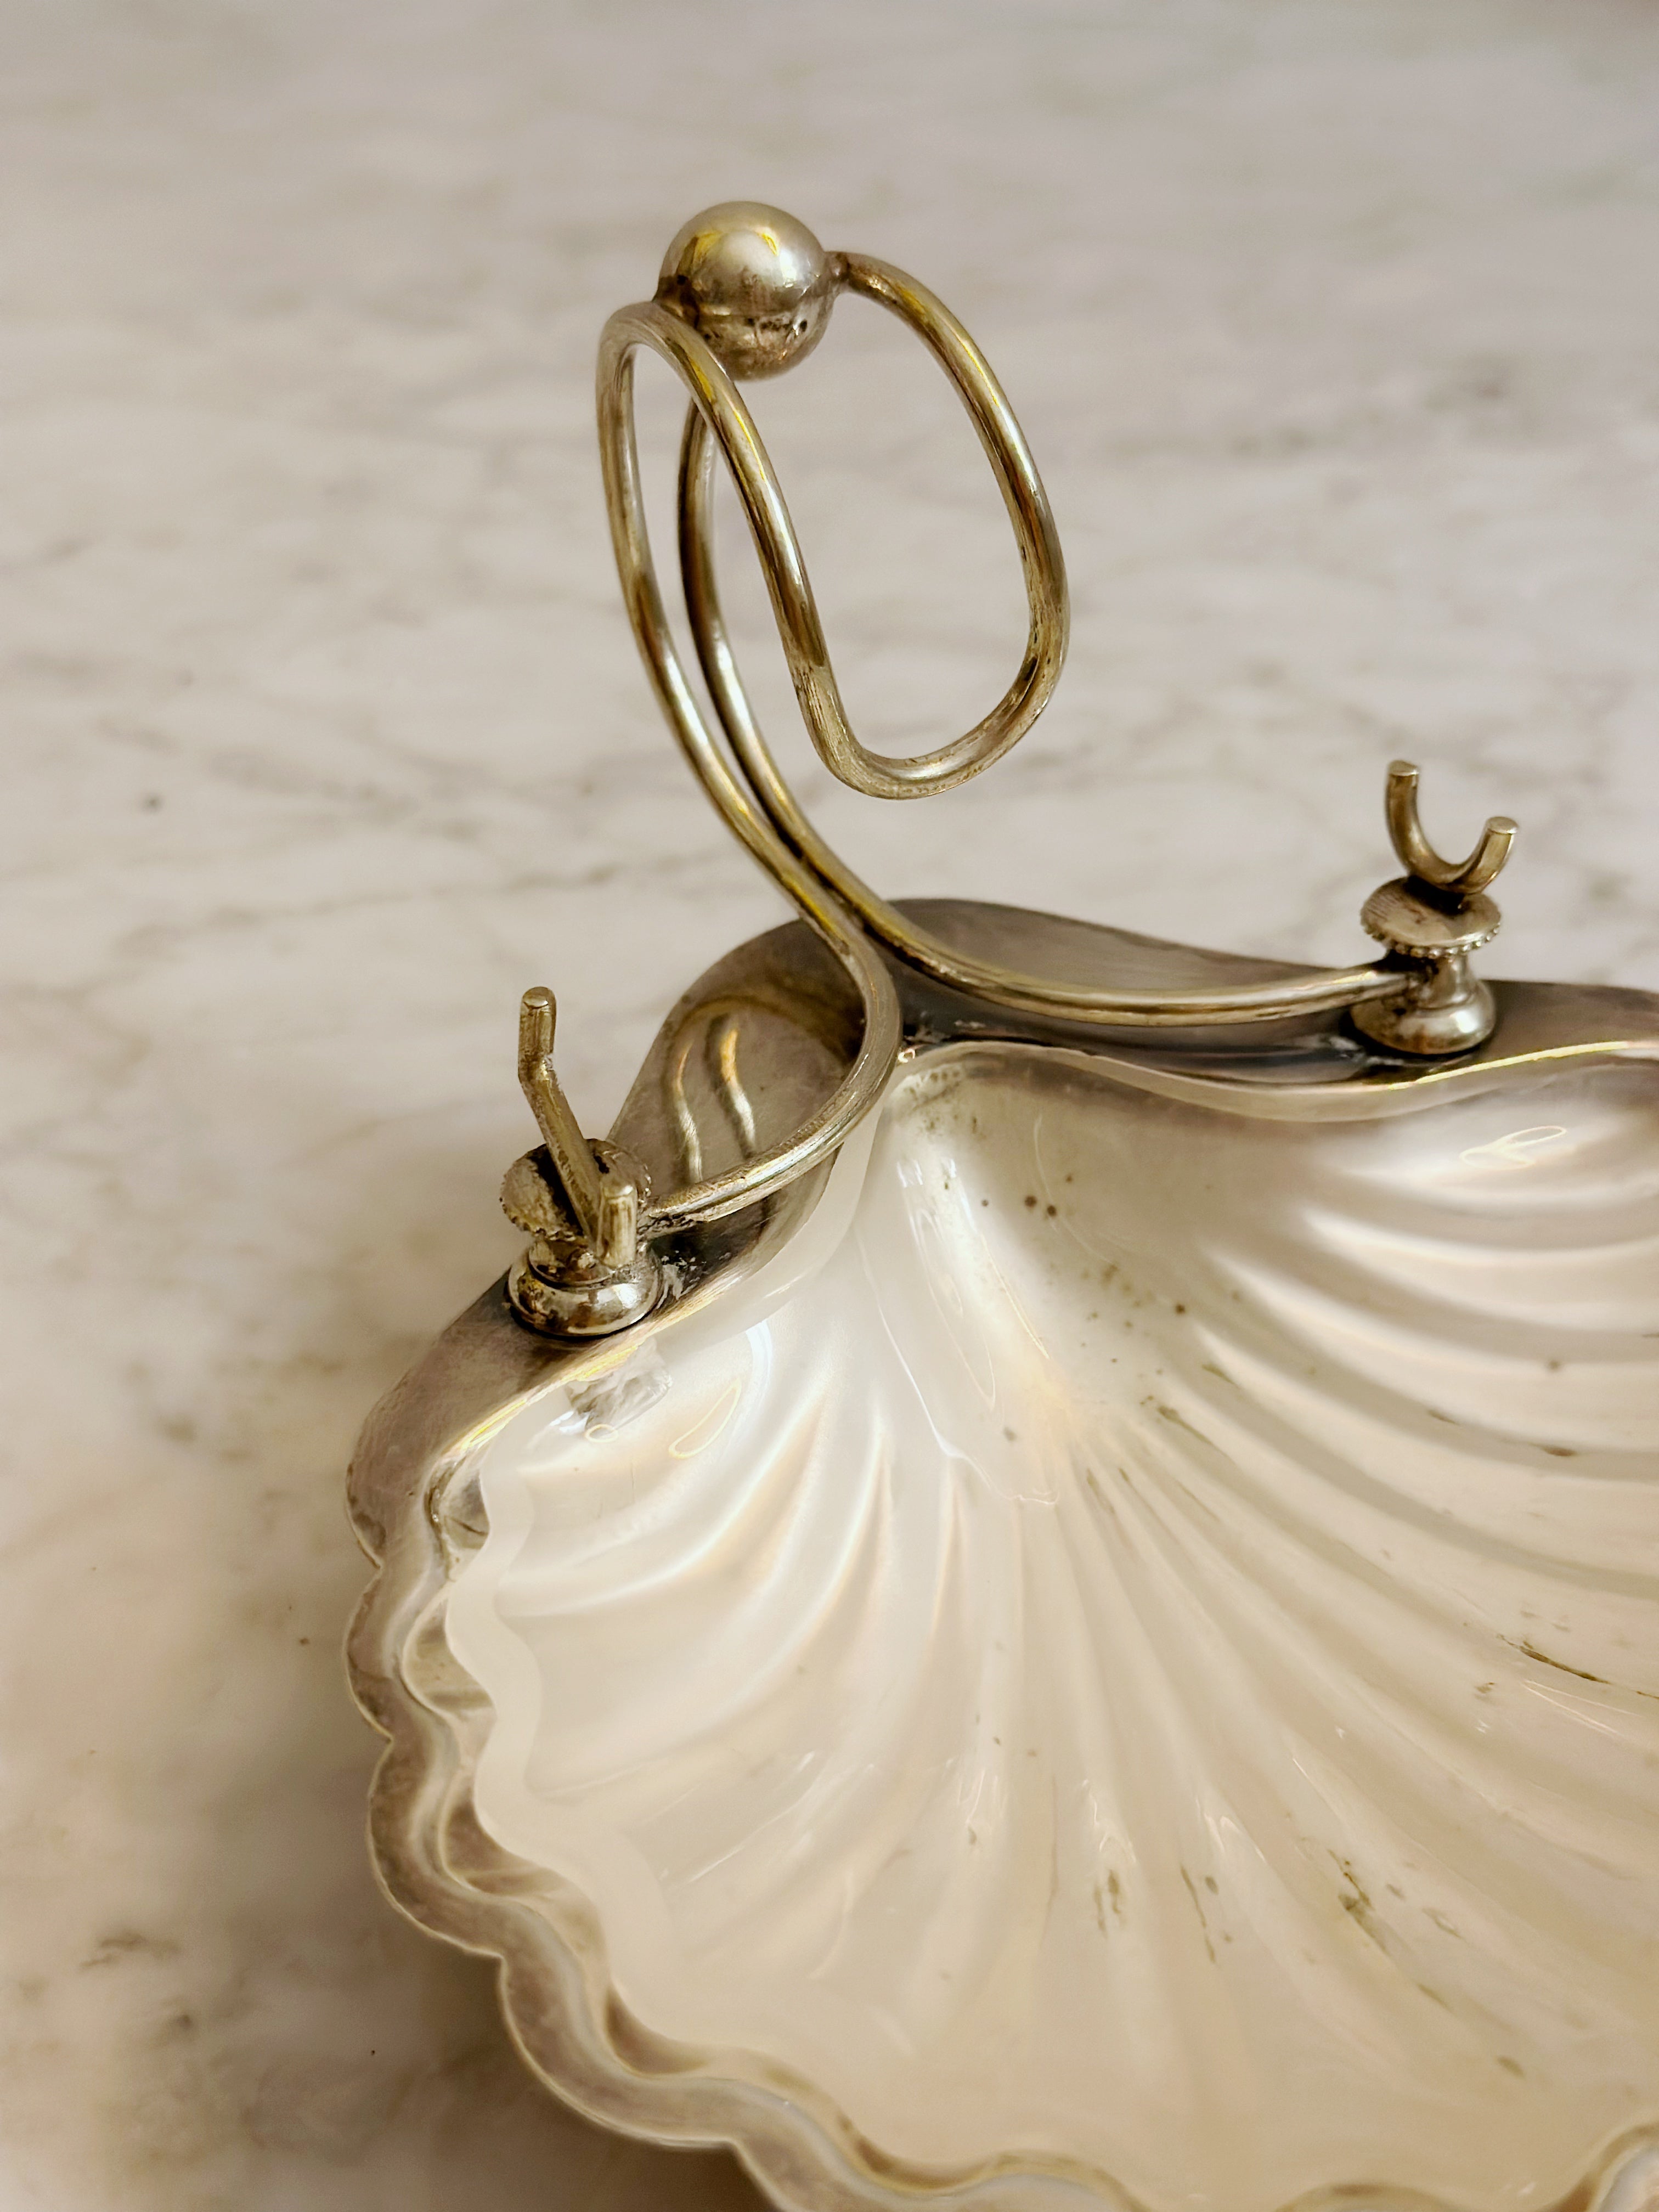 Vintage Scallop Shell Caviar or Butter Dish